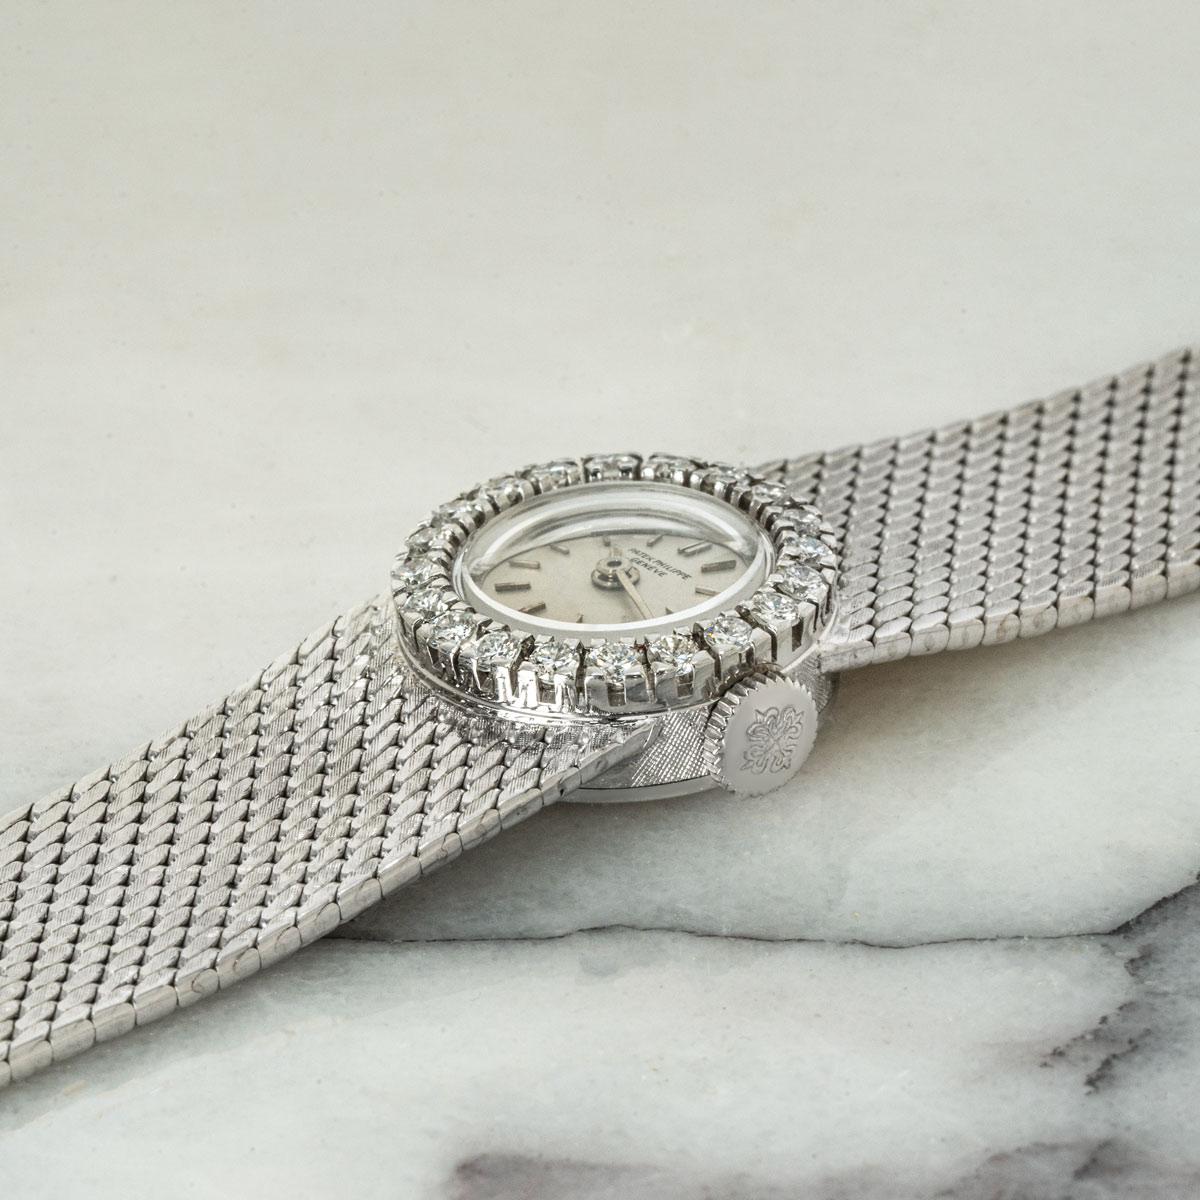 A white gold vintage Cocktail watch, by Patek Philippe. Featuring a silver dial and white gold bezel, the bezel being set with 20 round brilliant diamonds, ~0.49ct.

Fitted with a sapphire crystal and manual wind movement. This piece is presented on